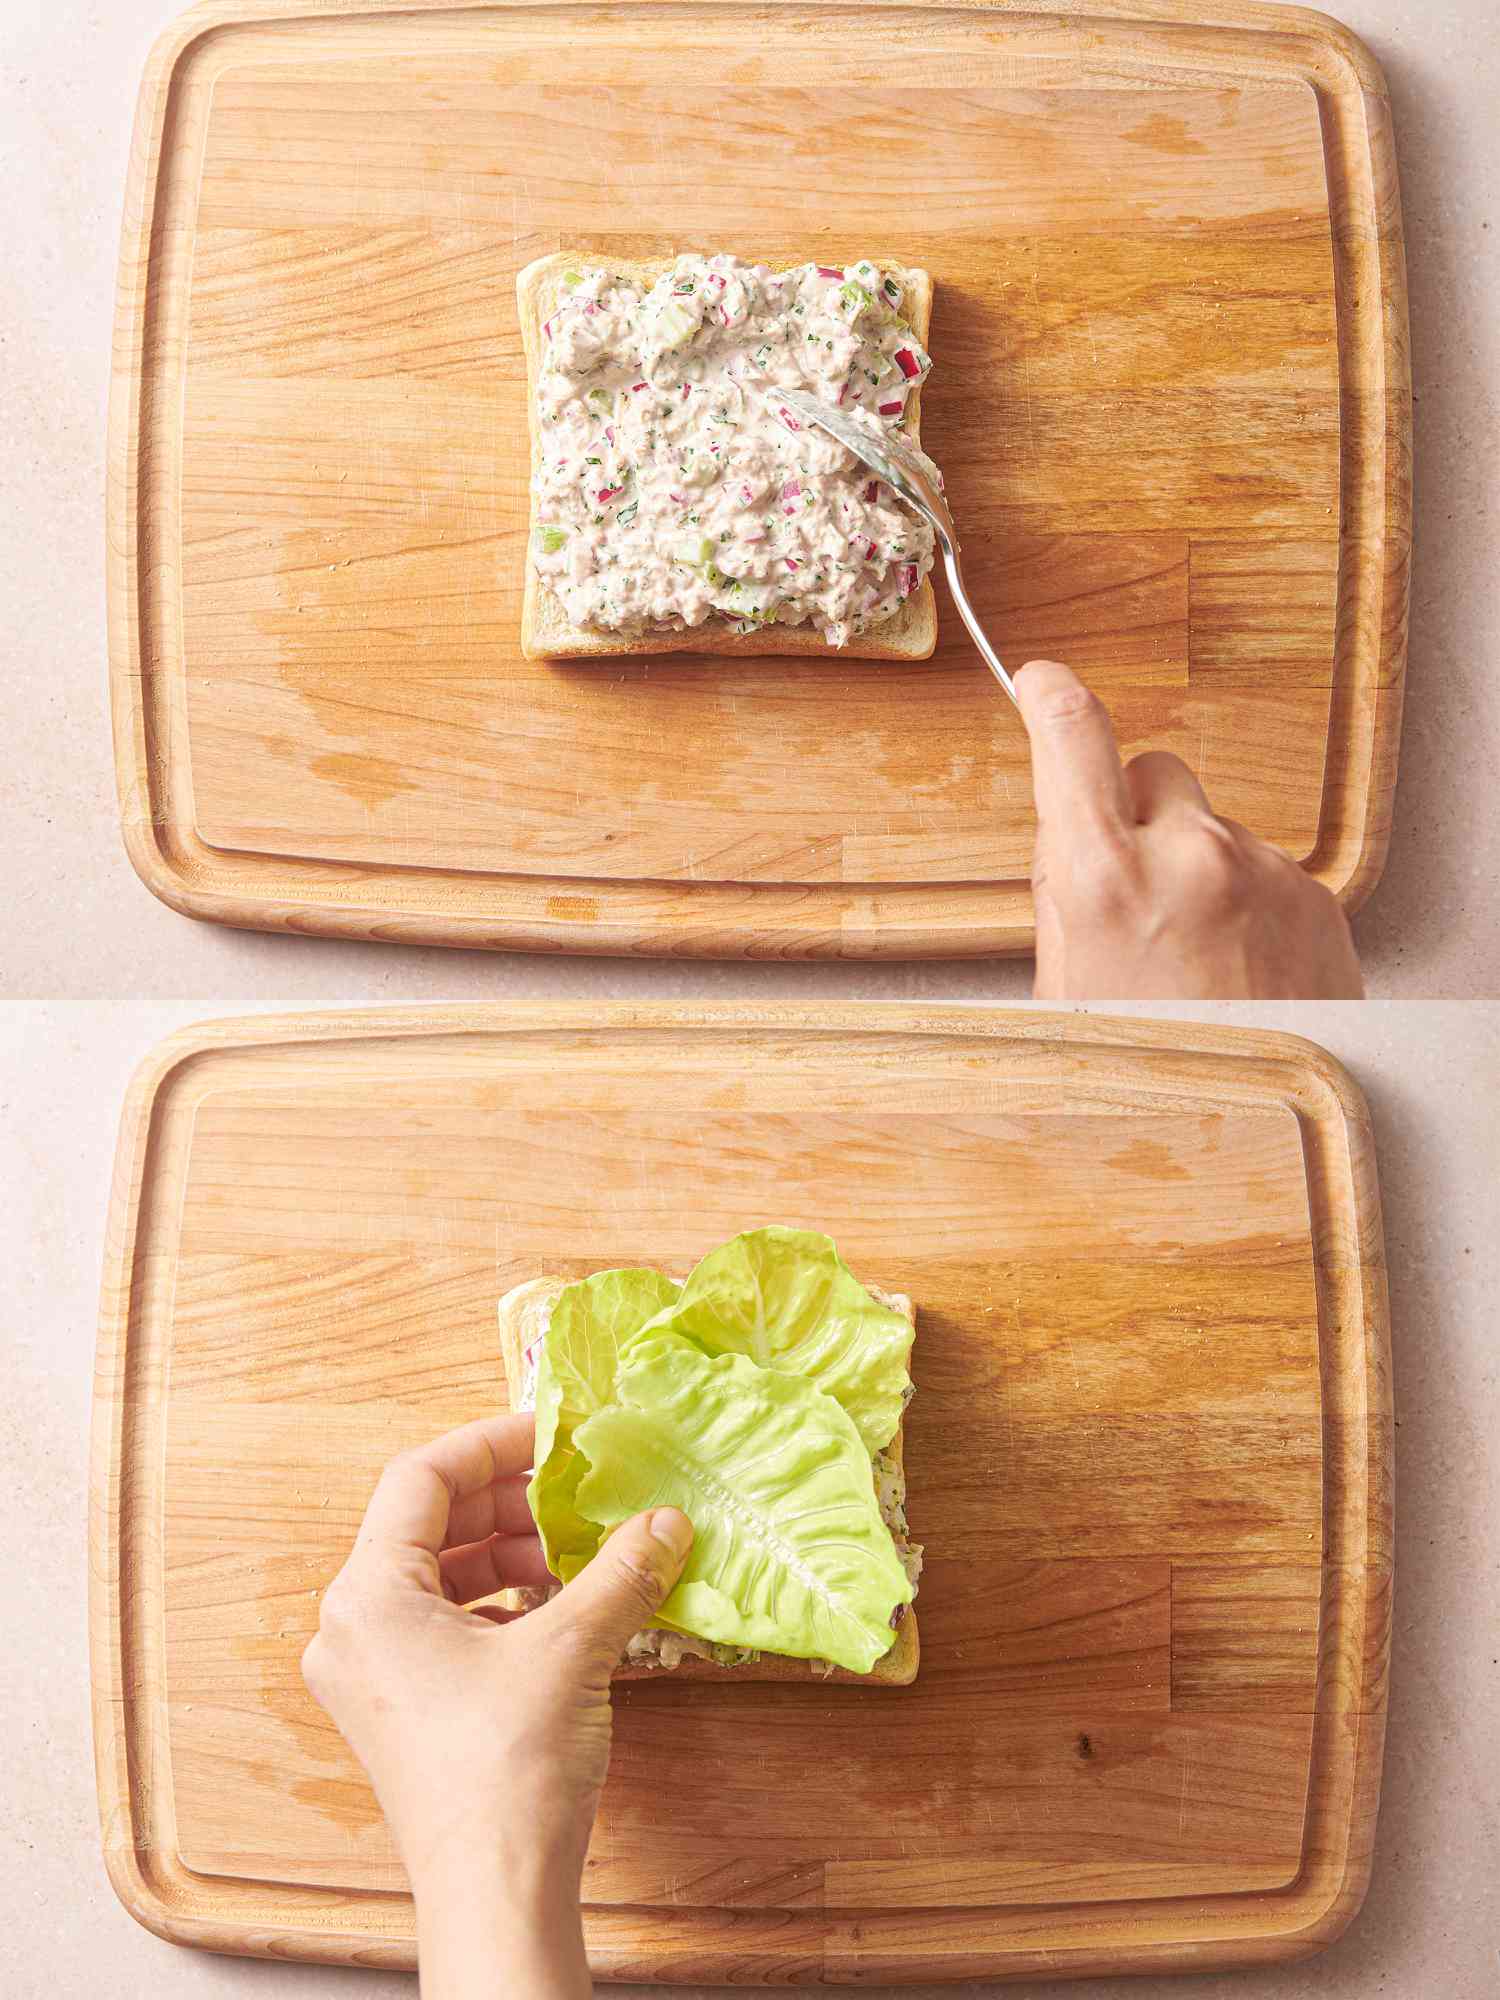 Tuna spooned onto a bread slice and tuna topped with lettuce leaves